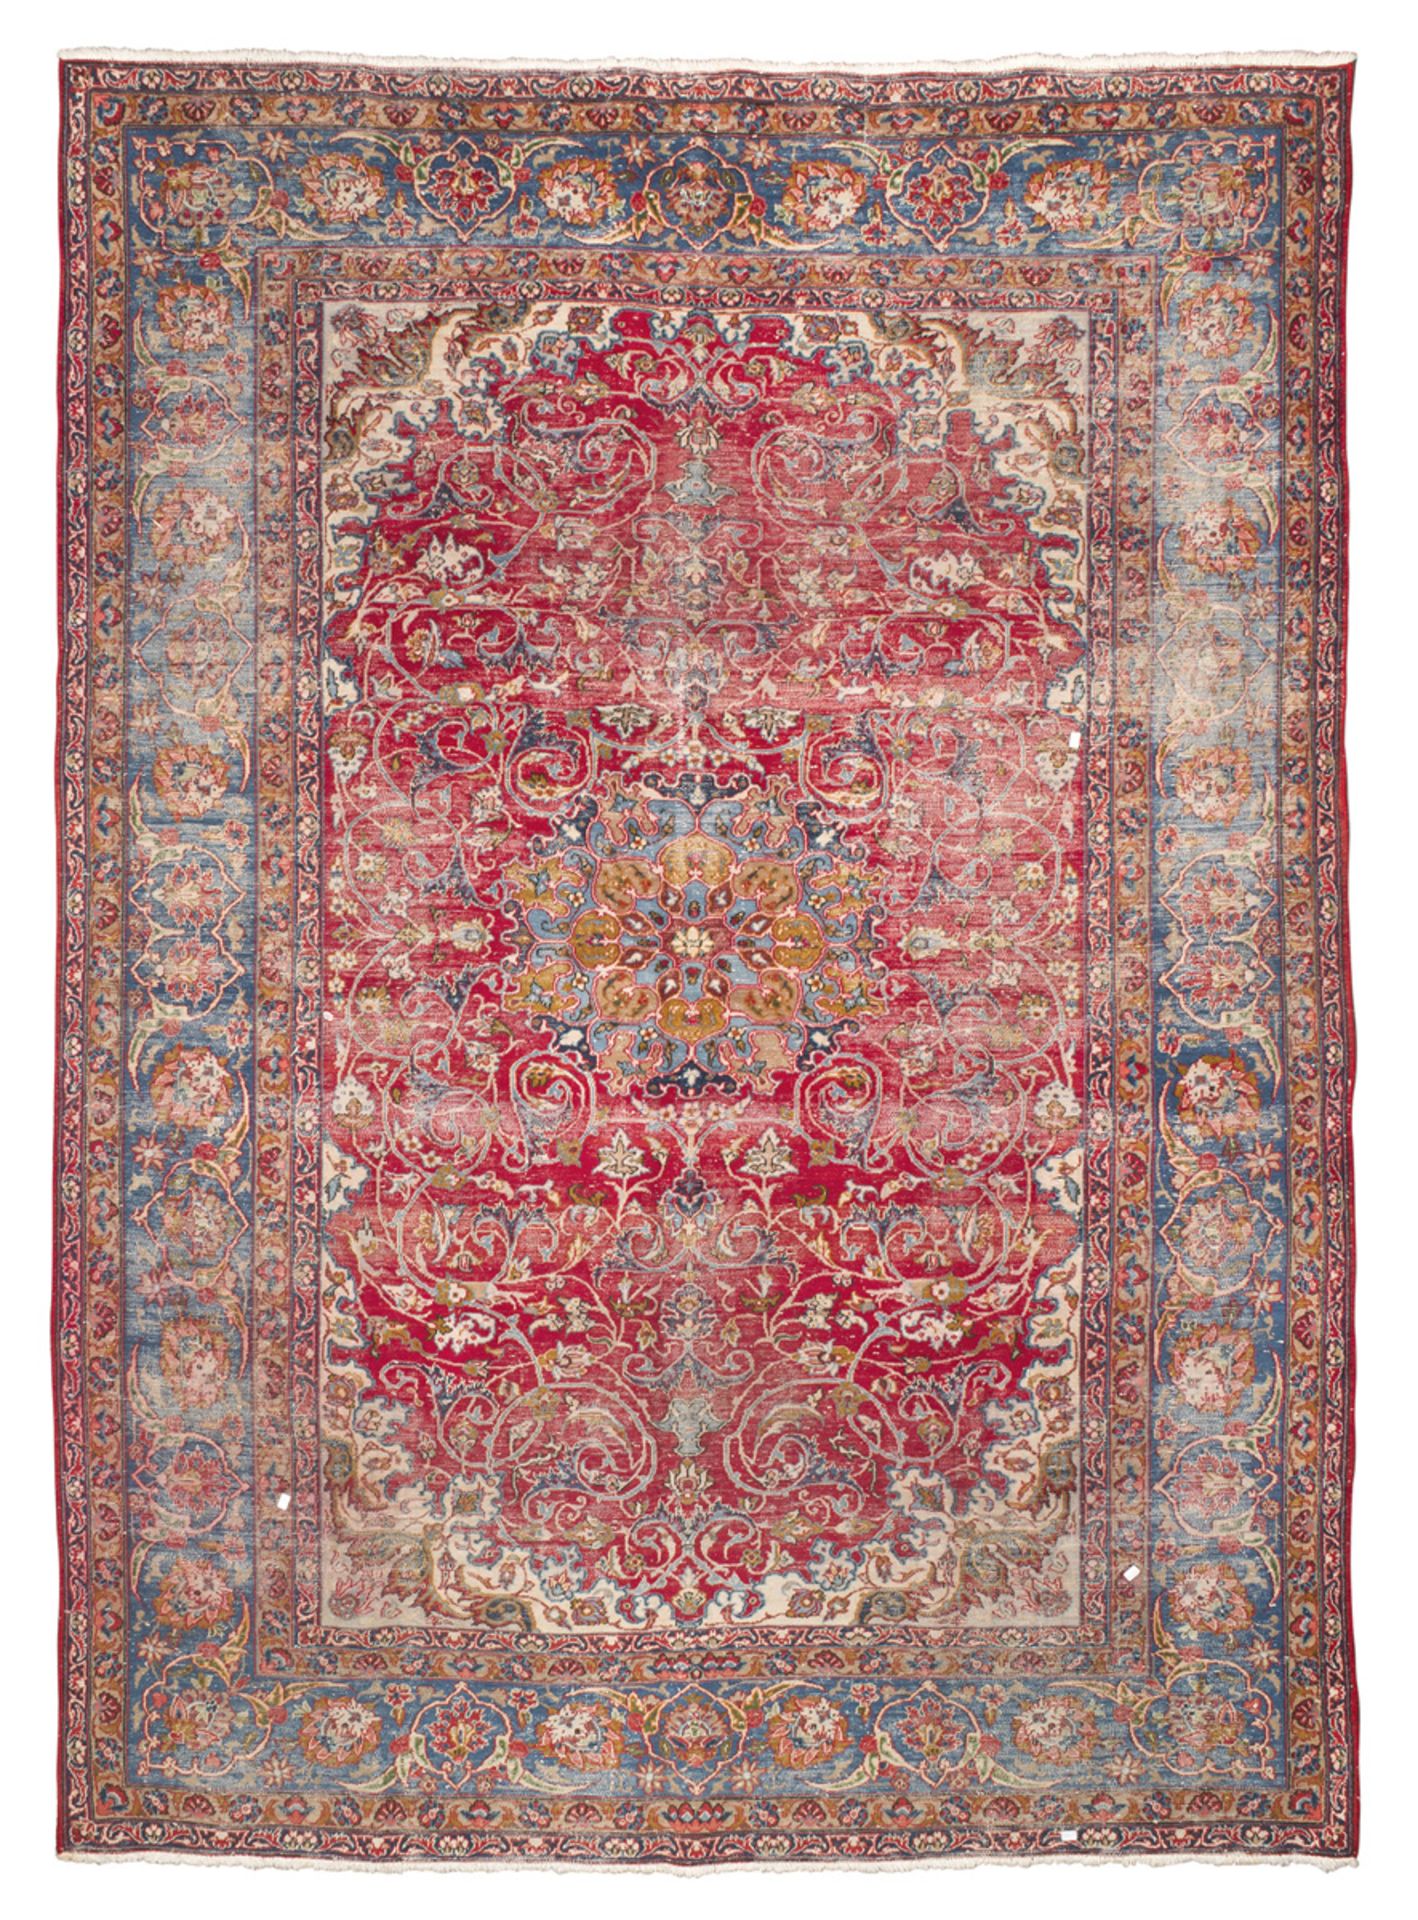 ISFAHAN CARPET, EARLY 20TH CENTURY with blue medallion and secondary motifs of twisted branches with